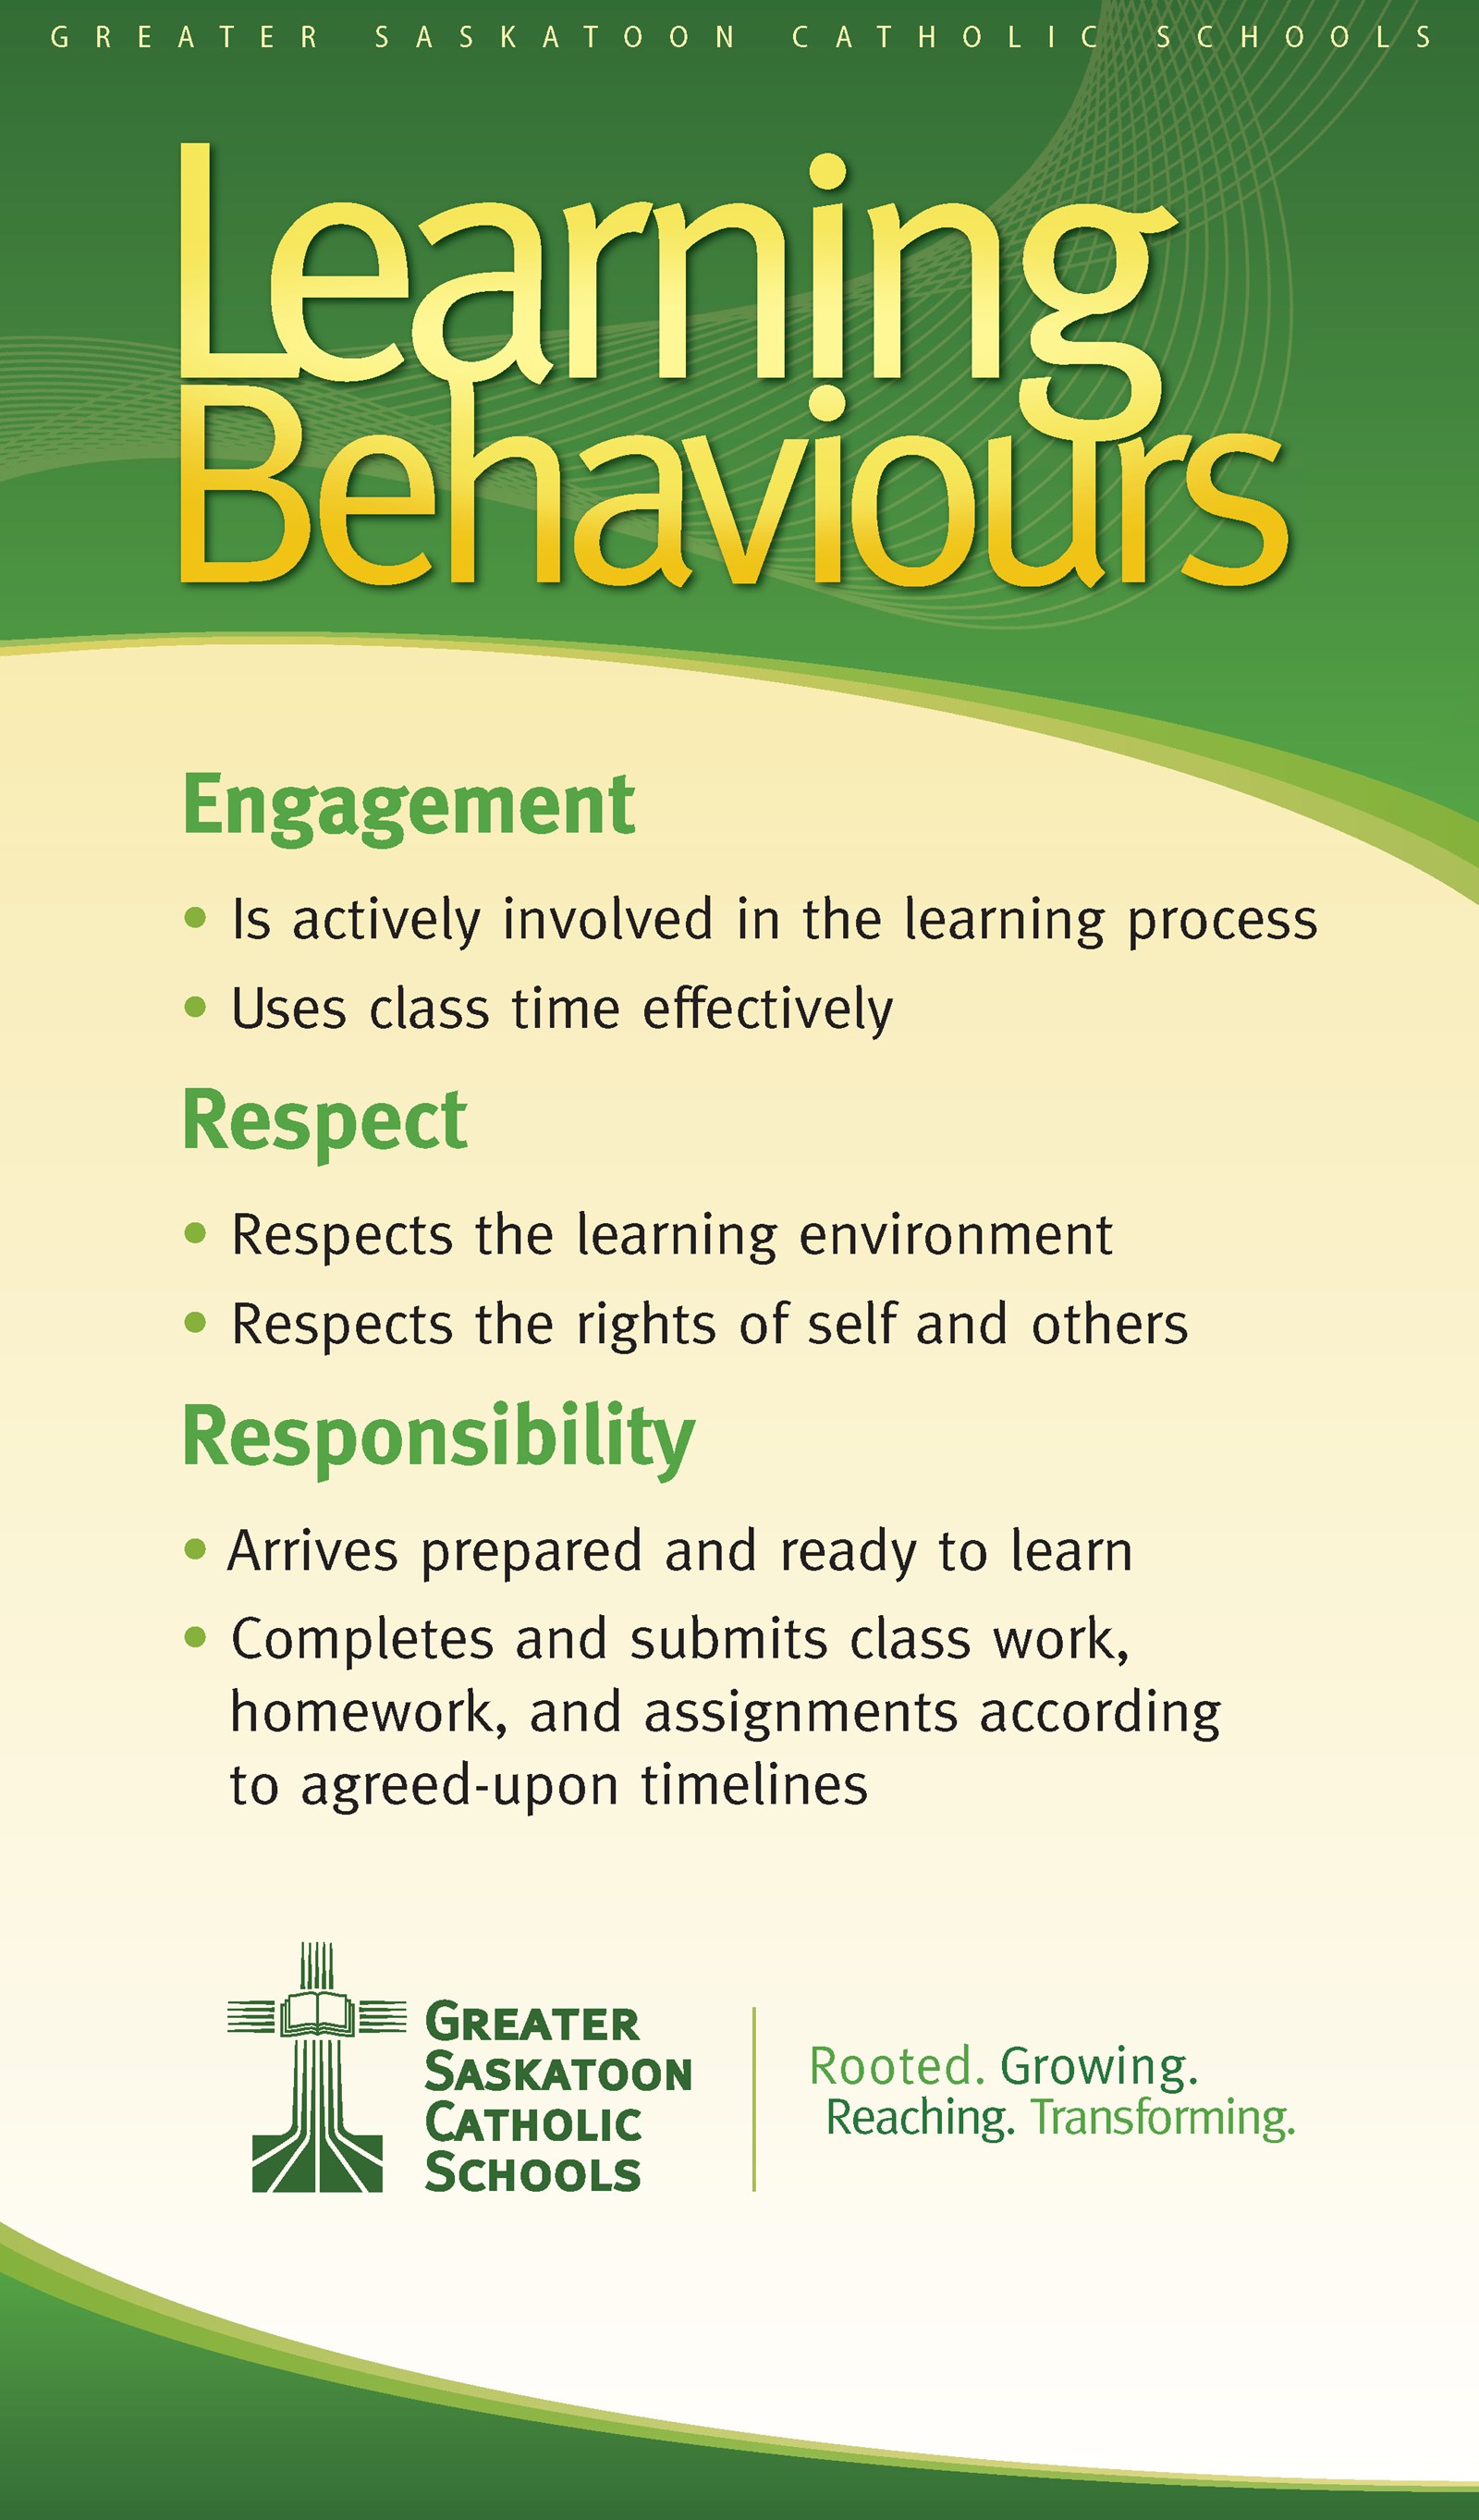 FINAL%20-%20GSCS%20July%202014%20LearningBehaviourPoster-Cropped-no-year_English-1.jpg